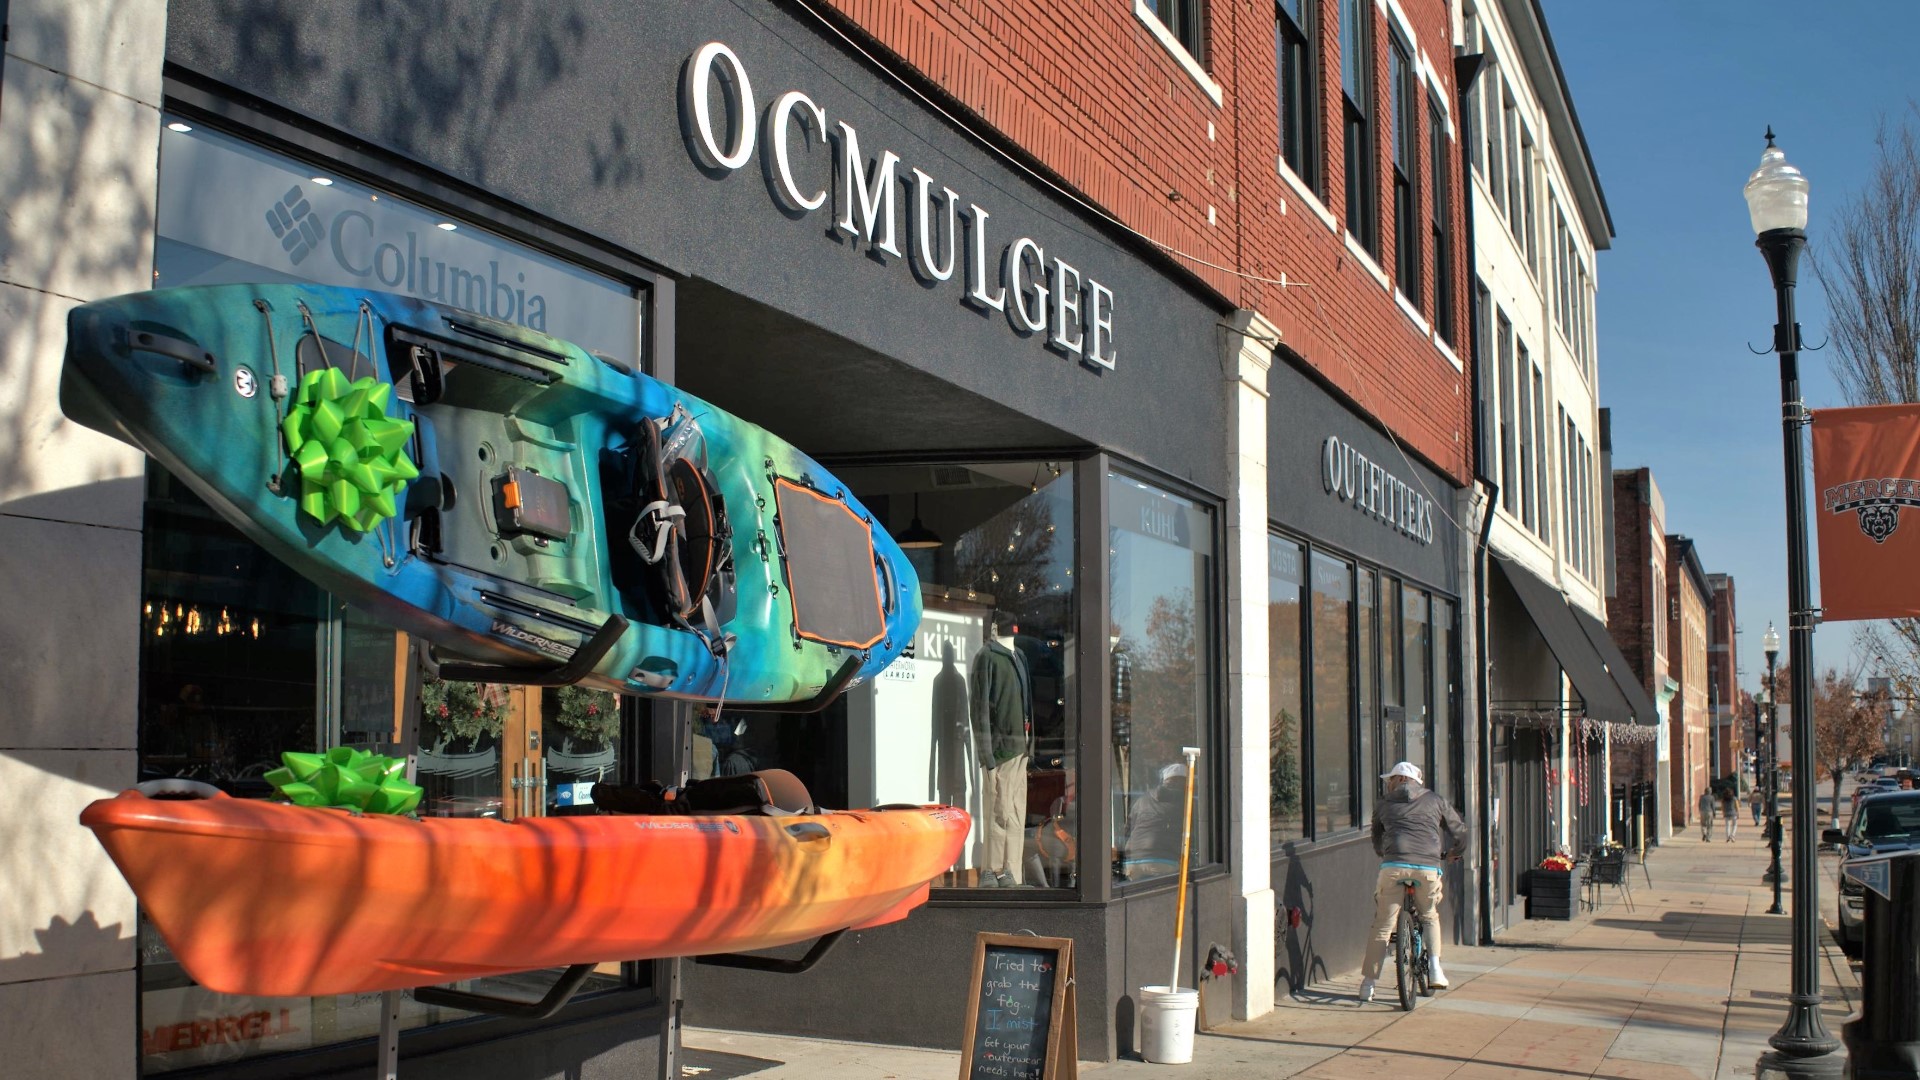 Ocmulgee Outfitters is a new outdoors store located at 565 Poplar Street